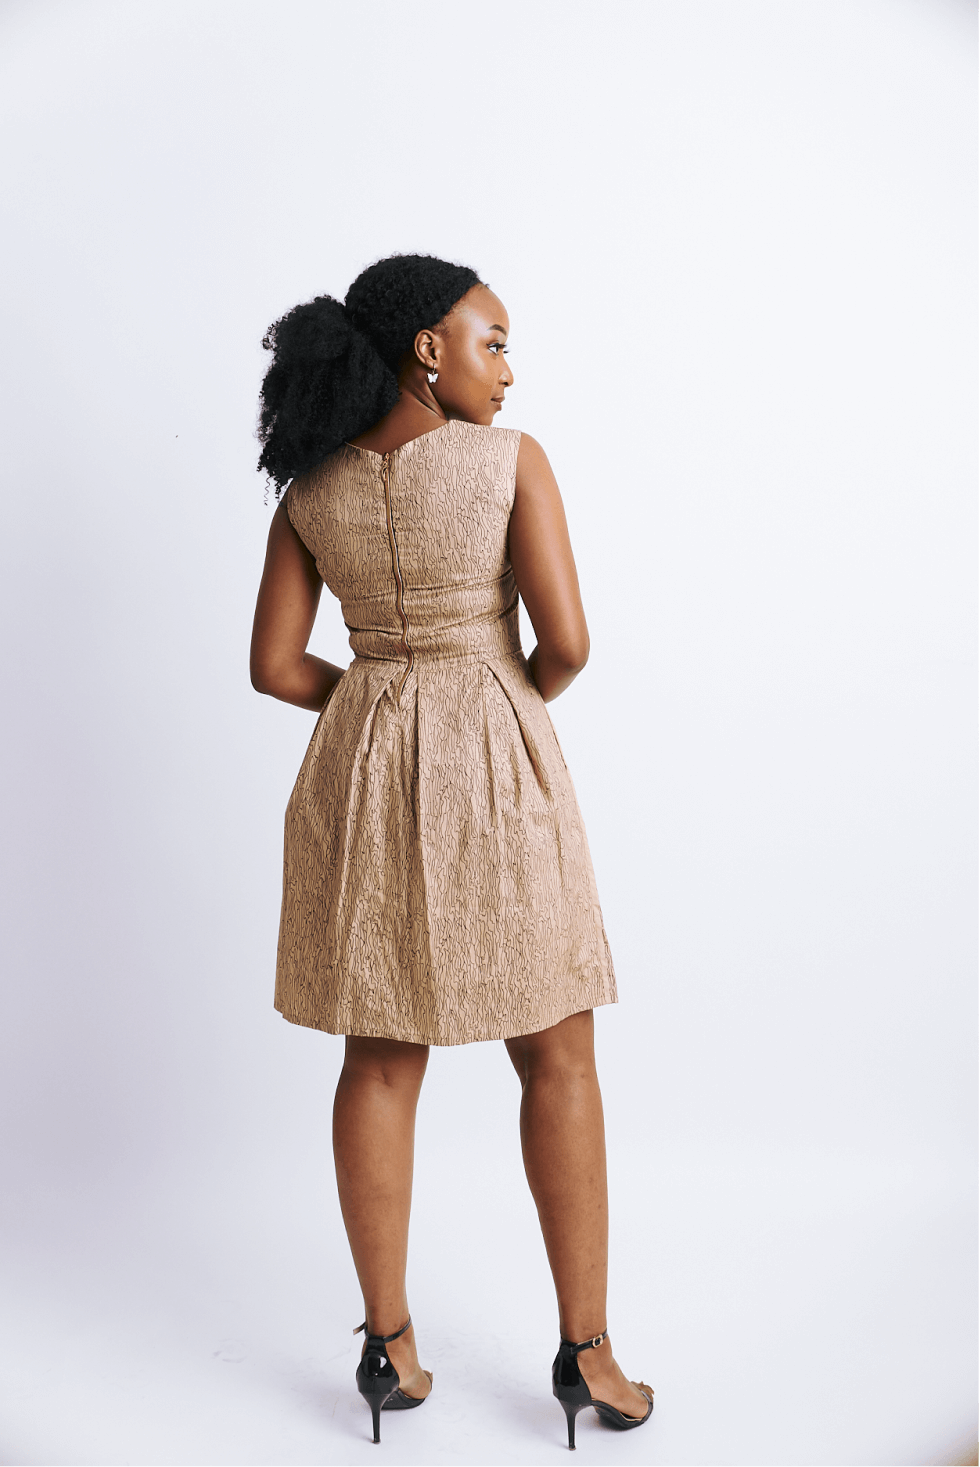 Shop Neutral Coloured Print Skater by The Fashion Frenzy on Arrai. Discover stylish, affordable clothing, jewelry, handbags and unique handmade pieces from top Kenyan & African fashion brands prioritising sustainability and quality craftsmanship.